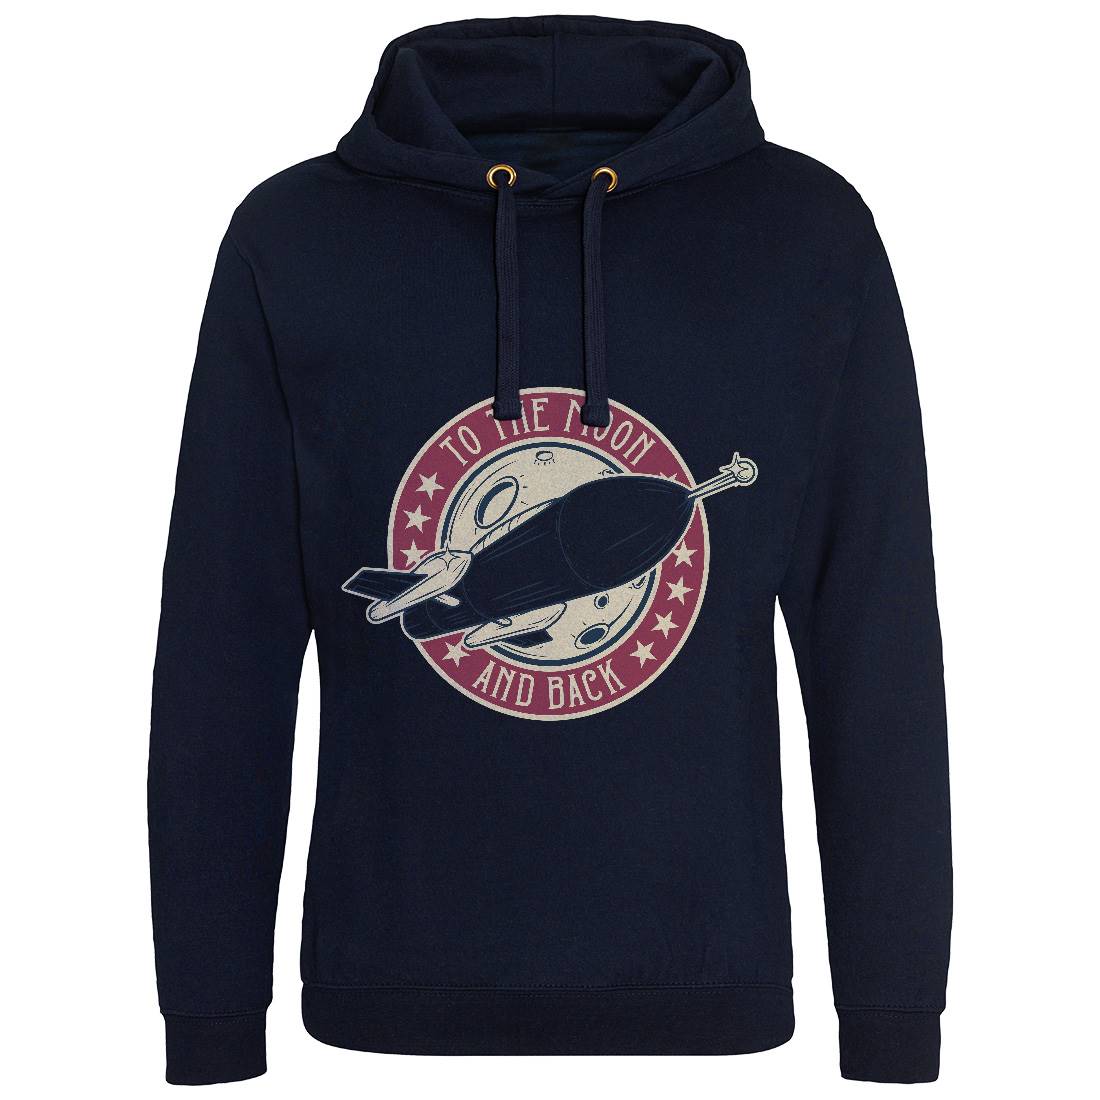 To The Moon Mens Hoodie Without Pocket Space D993